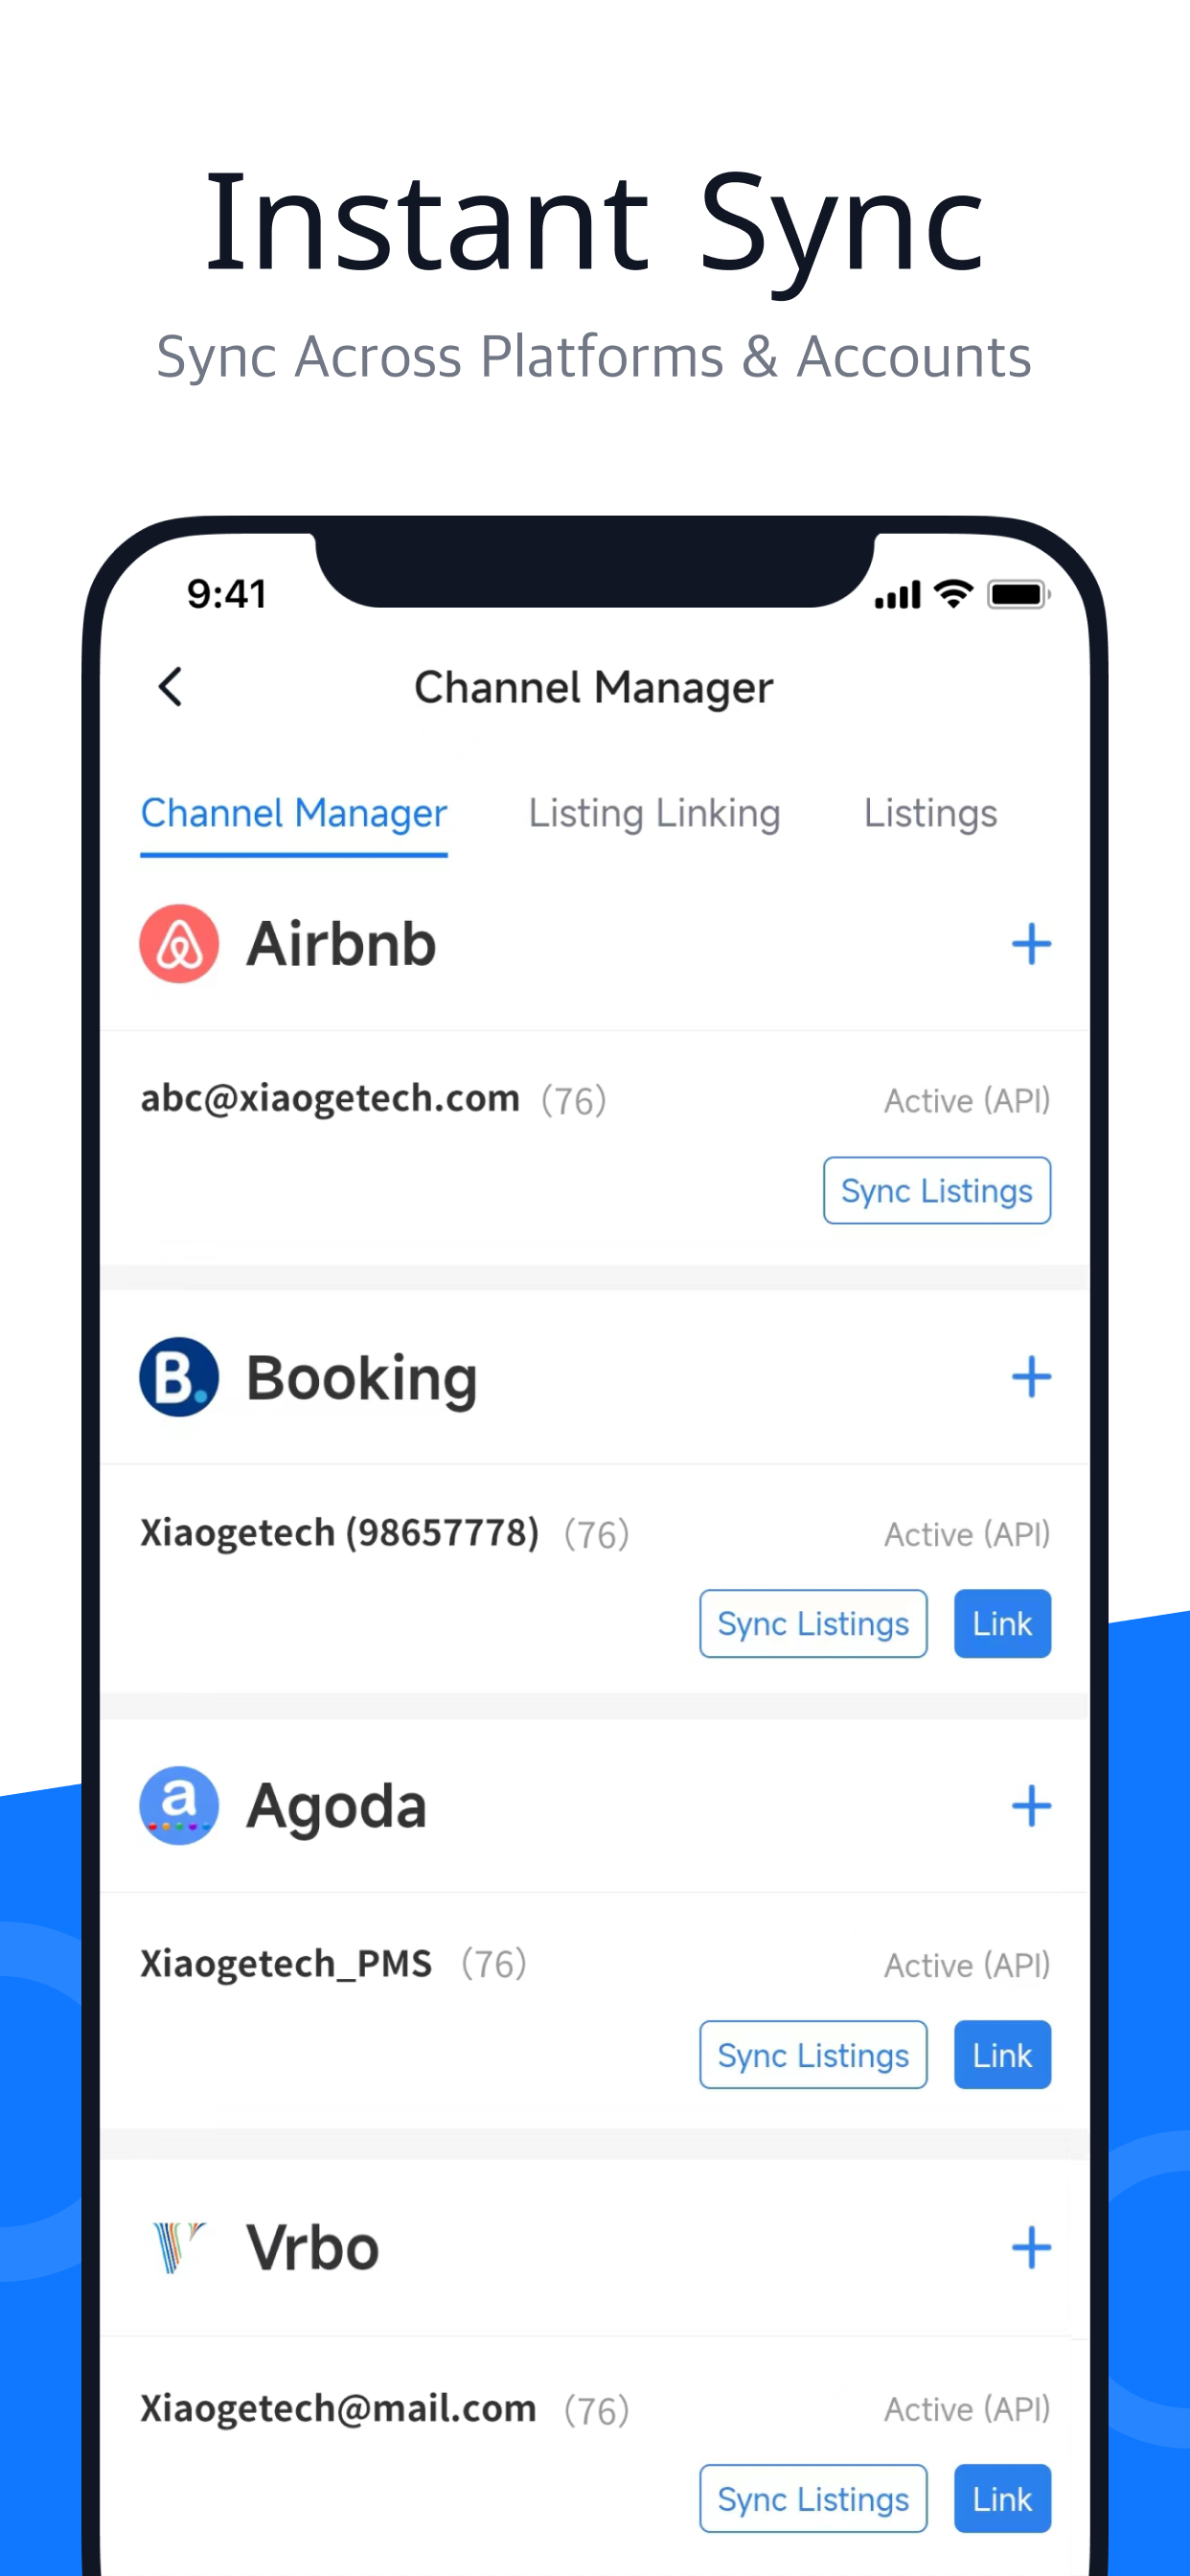 Hostex will sync all your booking portals, including Airbnb, Booking.com, VRBO, Agoda, and other top booking sites to gather all your information.